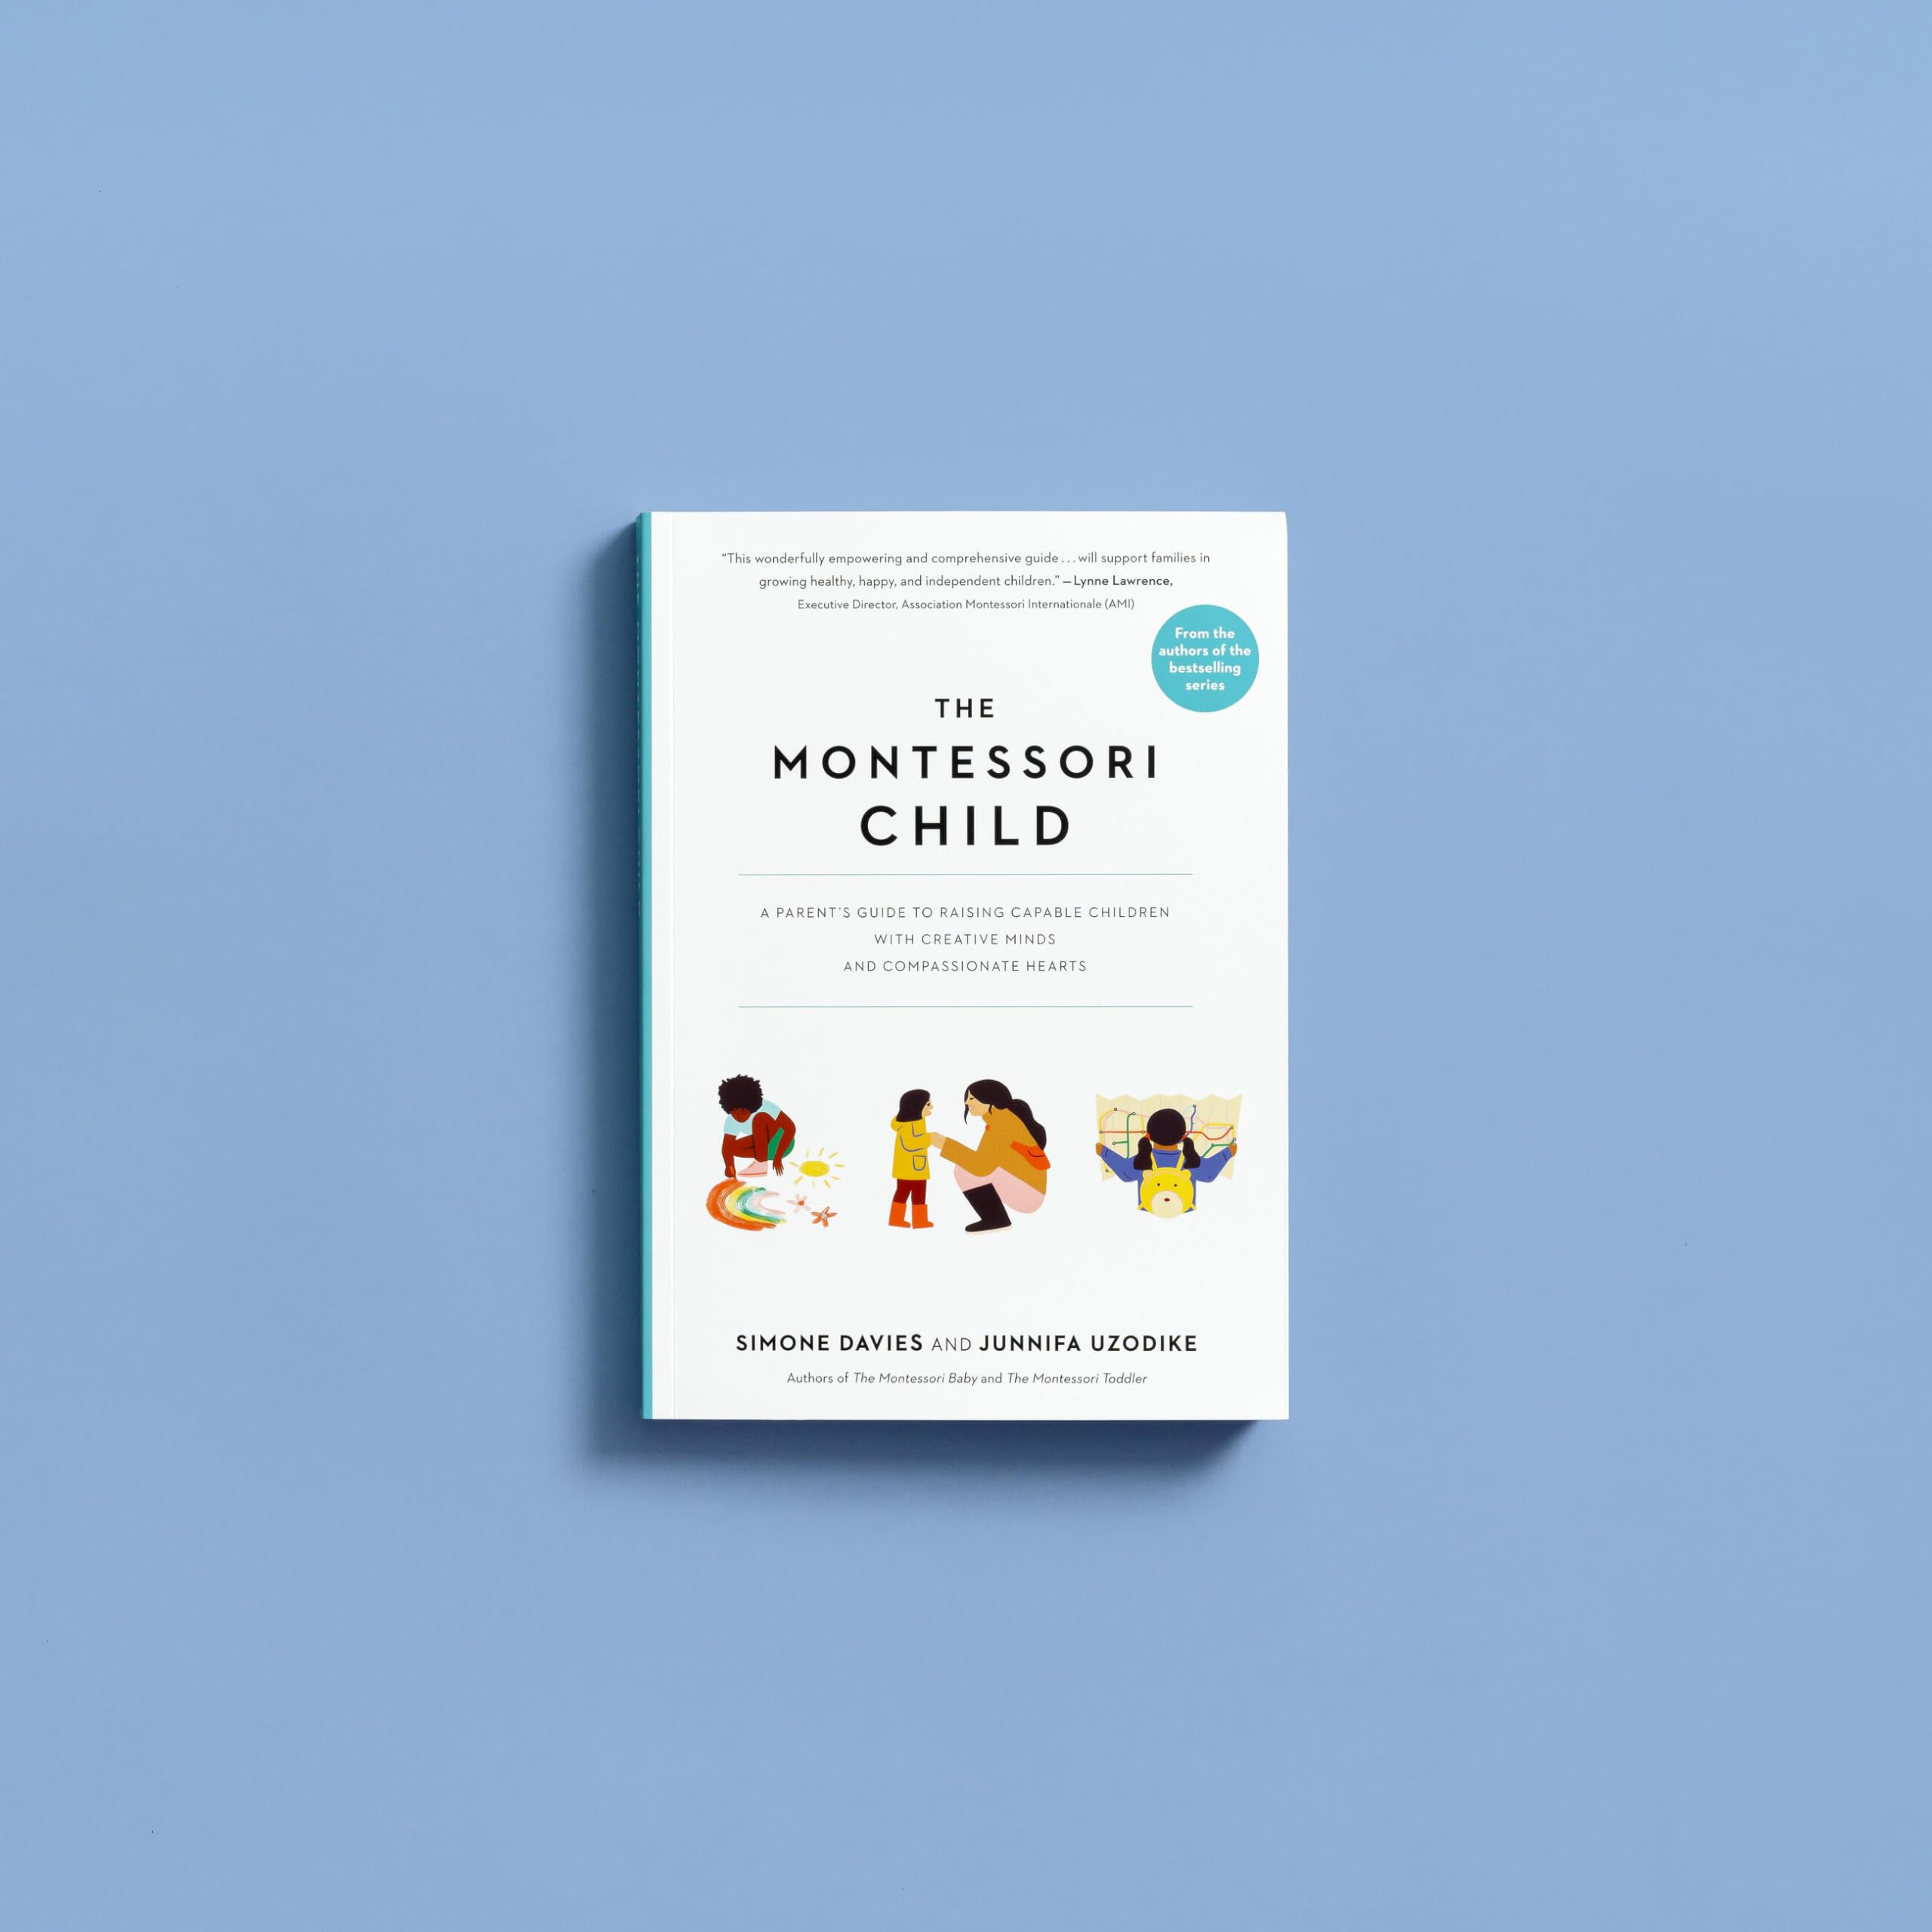 The Montessori Child: A Parent's Guide to Raising Capable Children with Creative Minds and Compassionate Hearts (The Parents' Guide to Montessori, 3)